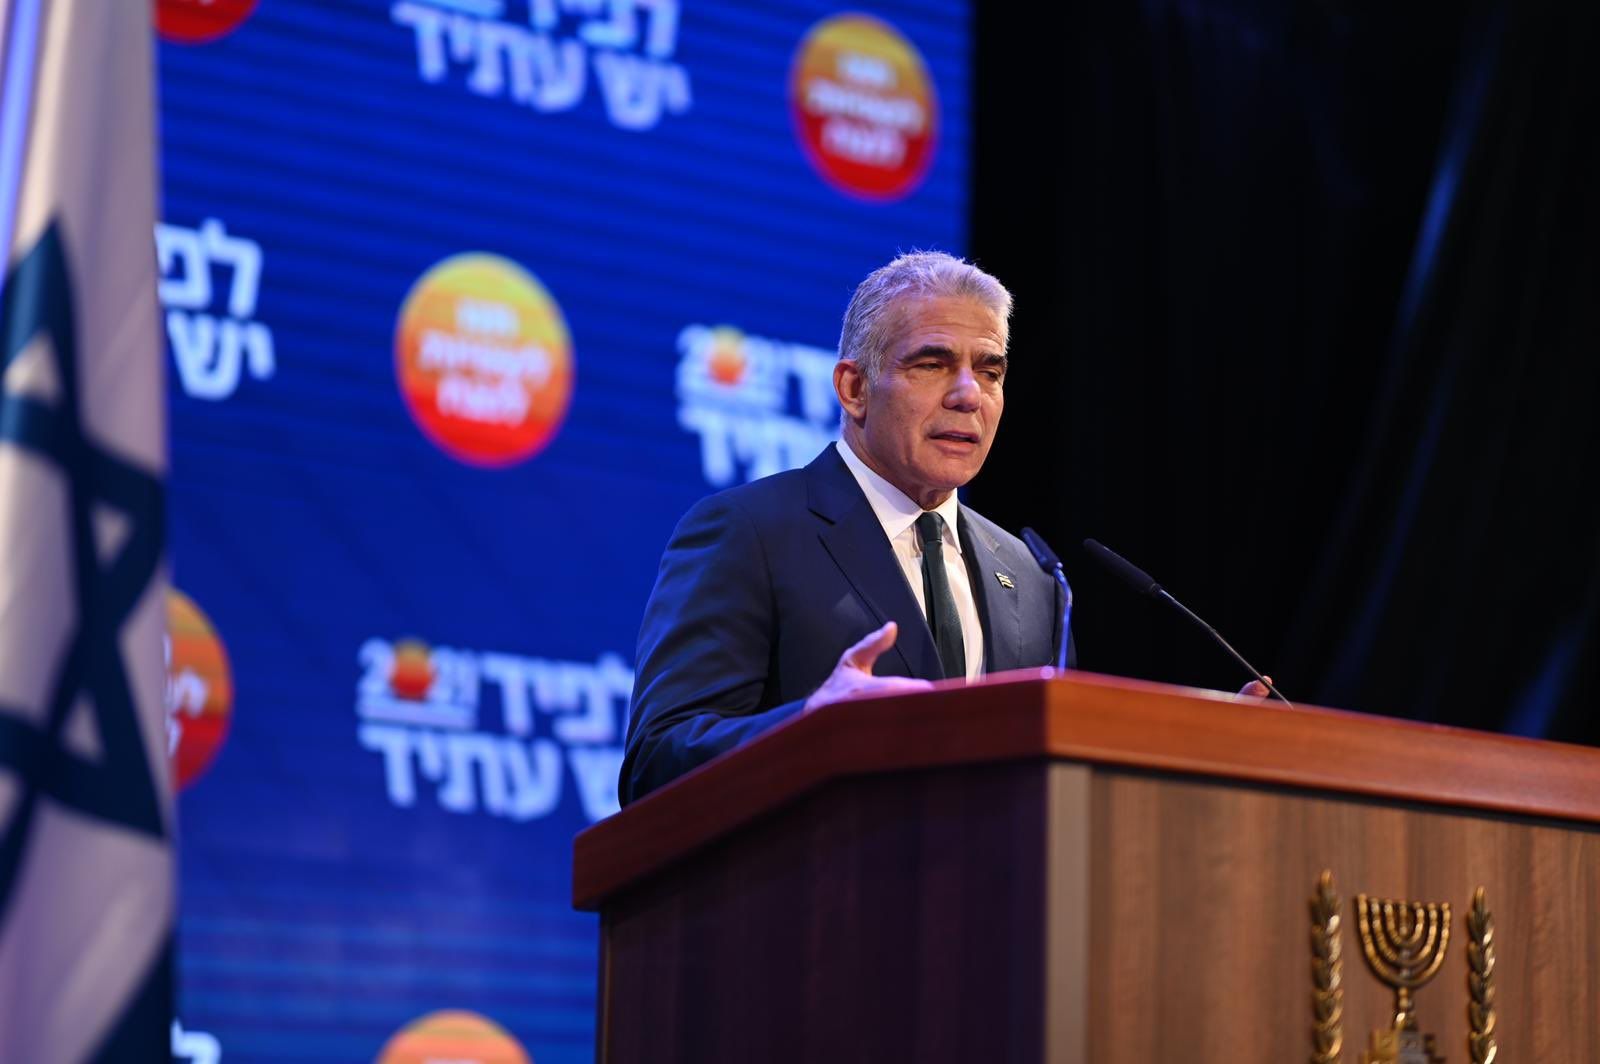 Israel opposition leader Yair Lapid confirms coalition deal has been reached